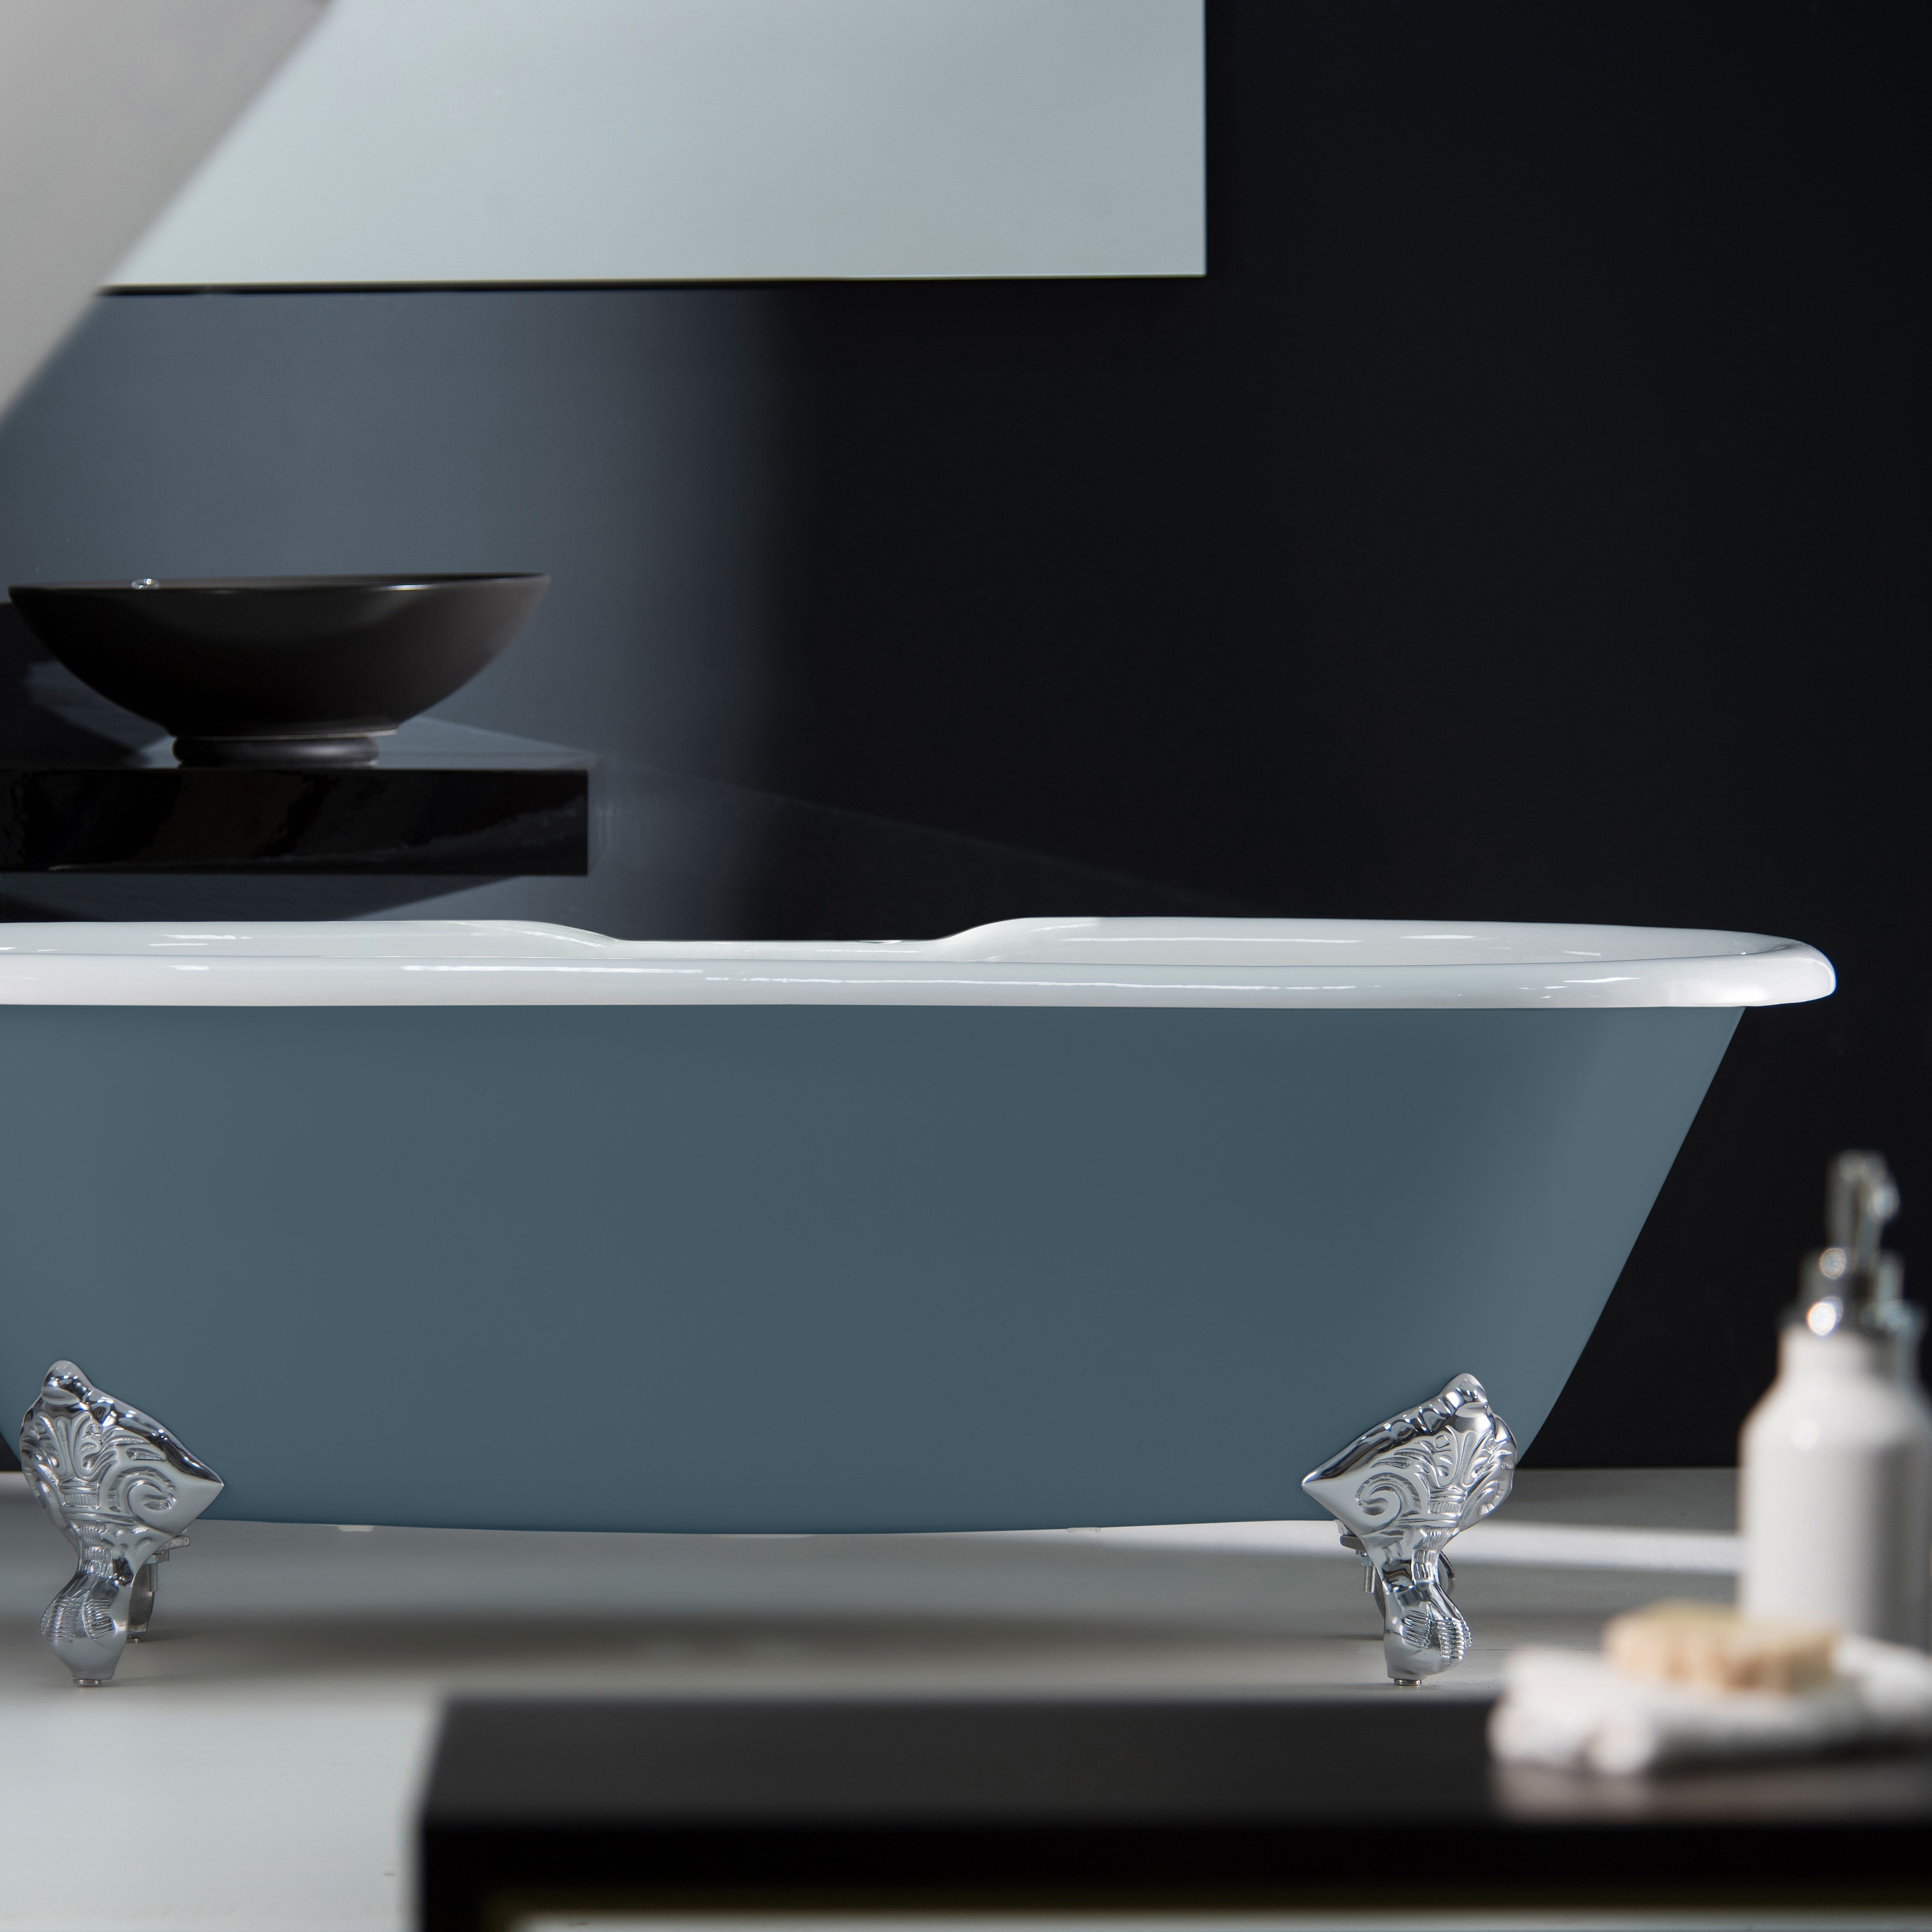 Arroll Moulin Gloss Blue Roll-top Double ended Bath with 2 Tap holes (L)170cm (W)77cm